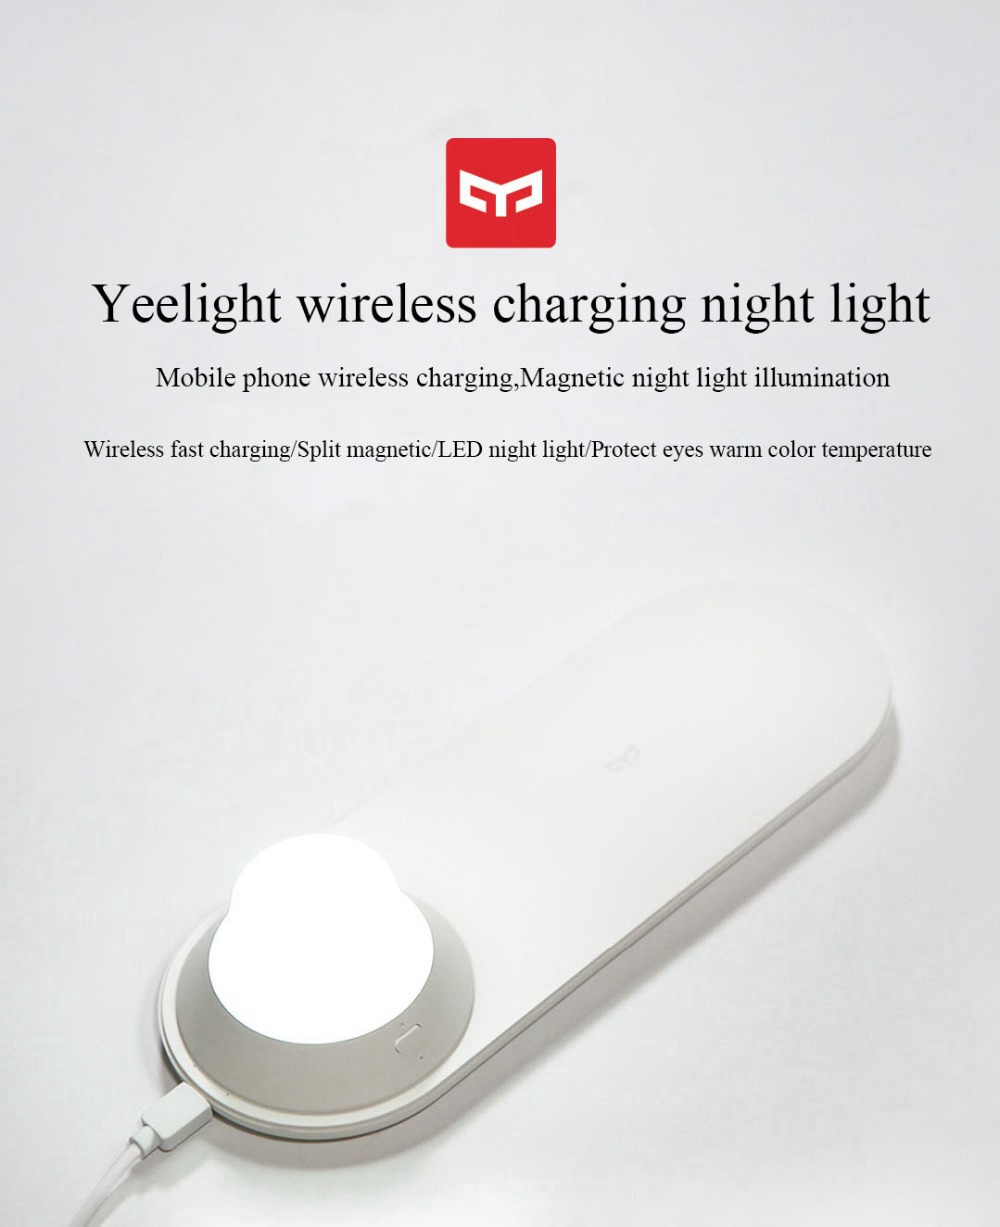 Yeelight-Wireless-Charger-with-LED-Night-Light-Magnetic-Attraction-Fast-Charging-For-iPhone--Ecosyst-1414272-1